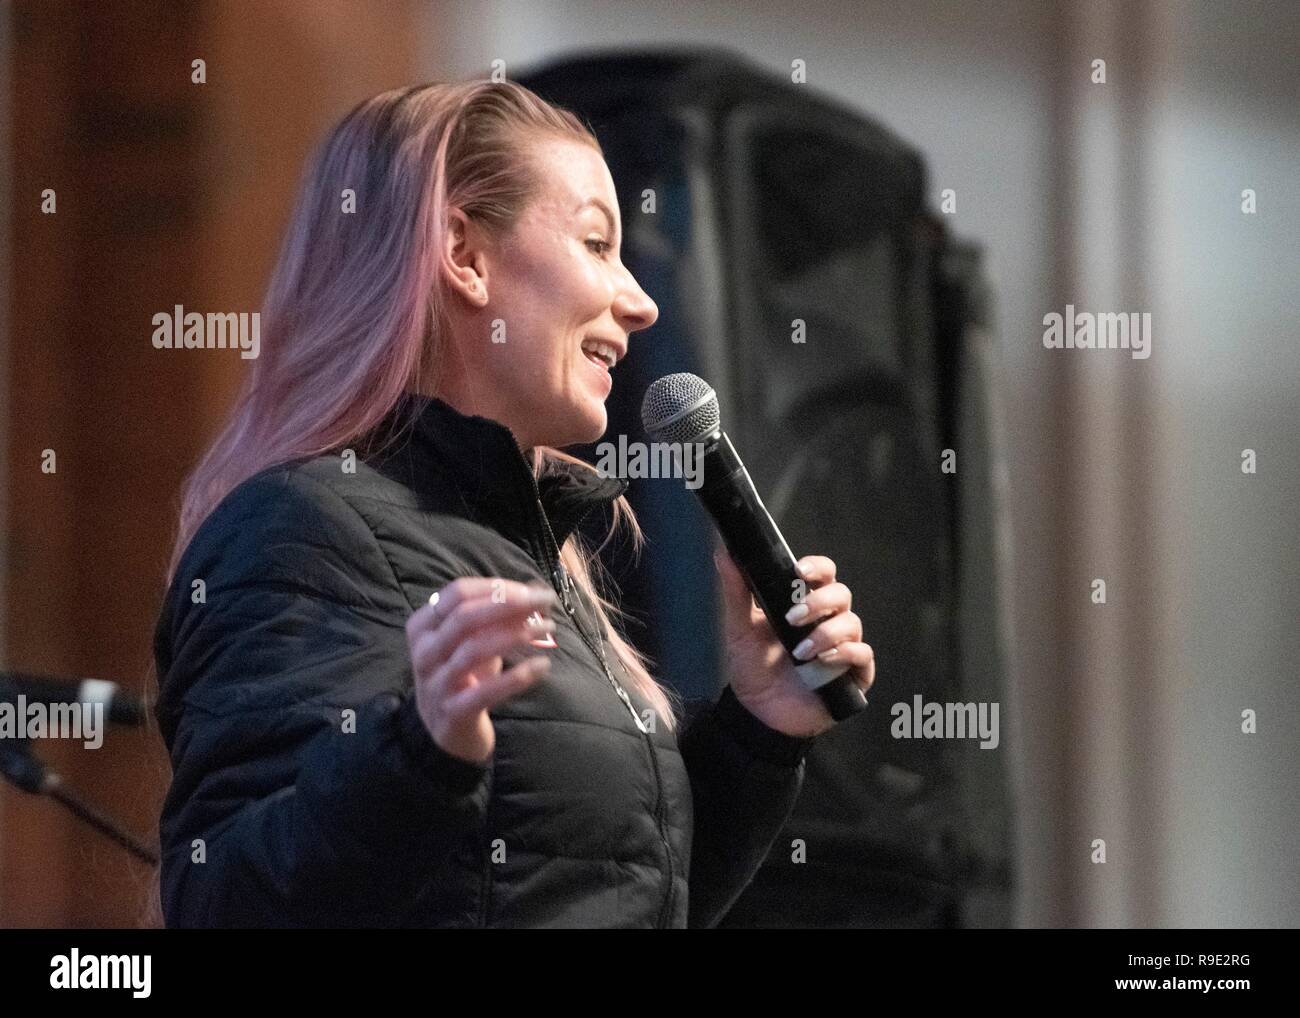 Manama, Bahrain. 21st Dec, 2018. Comedian Jessiemae Peluso performs during the Joint Chiefs USO Christmas Show for deployed service members December 21, 2018 in Vaernes, Norway. This year’s entertainers include actors Milo Ventimiglia, Wilmer Valderrama, DJ J Dayz, Fittest Man on Earth Matt Fraser, 3-time Olympic Gold Medalist Shaun White, Country Music Singer Kellie Pickler, and comedian Jessiemae Peluso. Credit: Planetpix/Alamy Live News Stock Photo